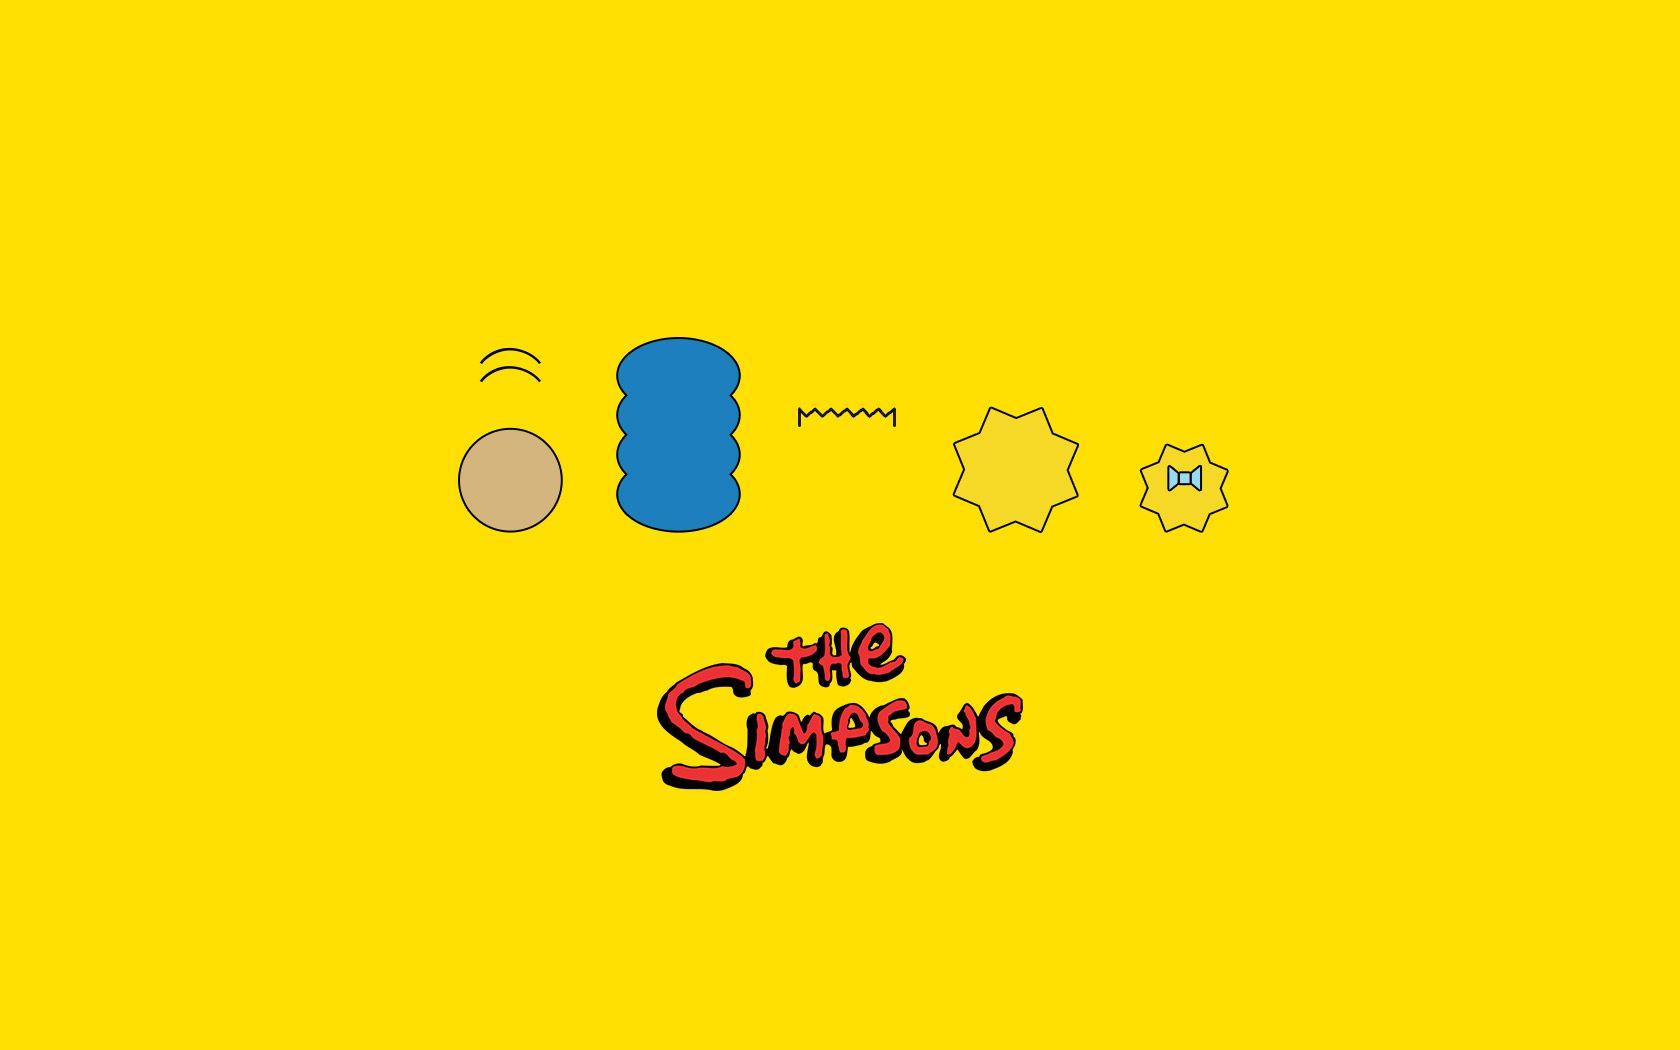 Top The Simpsons HQ Picture, The Simpsons WD 32 Wallpaper